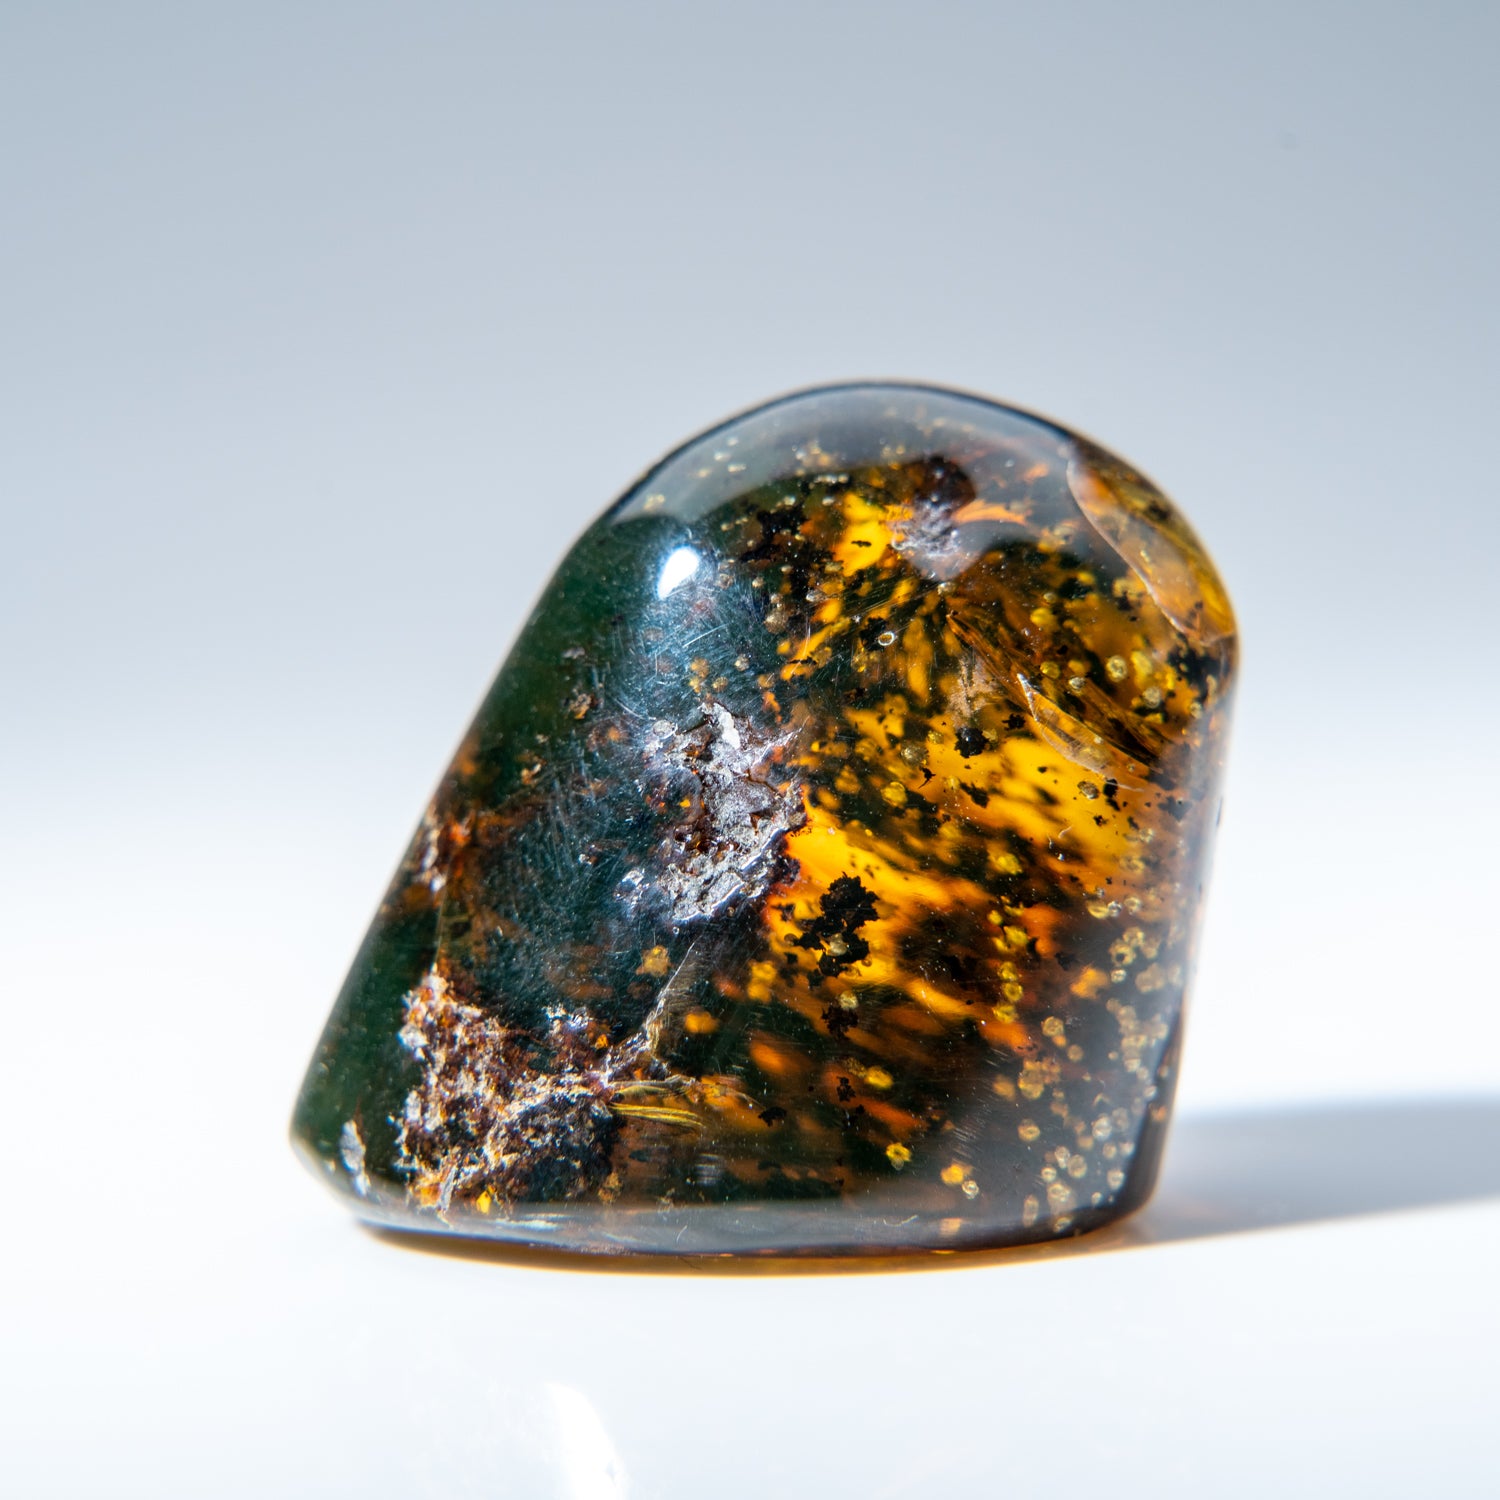 Genuine Natural Amber from Chiapas, Mexico (19.4 grams)